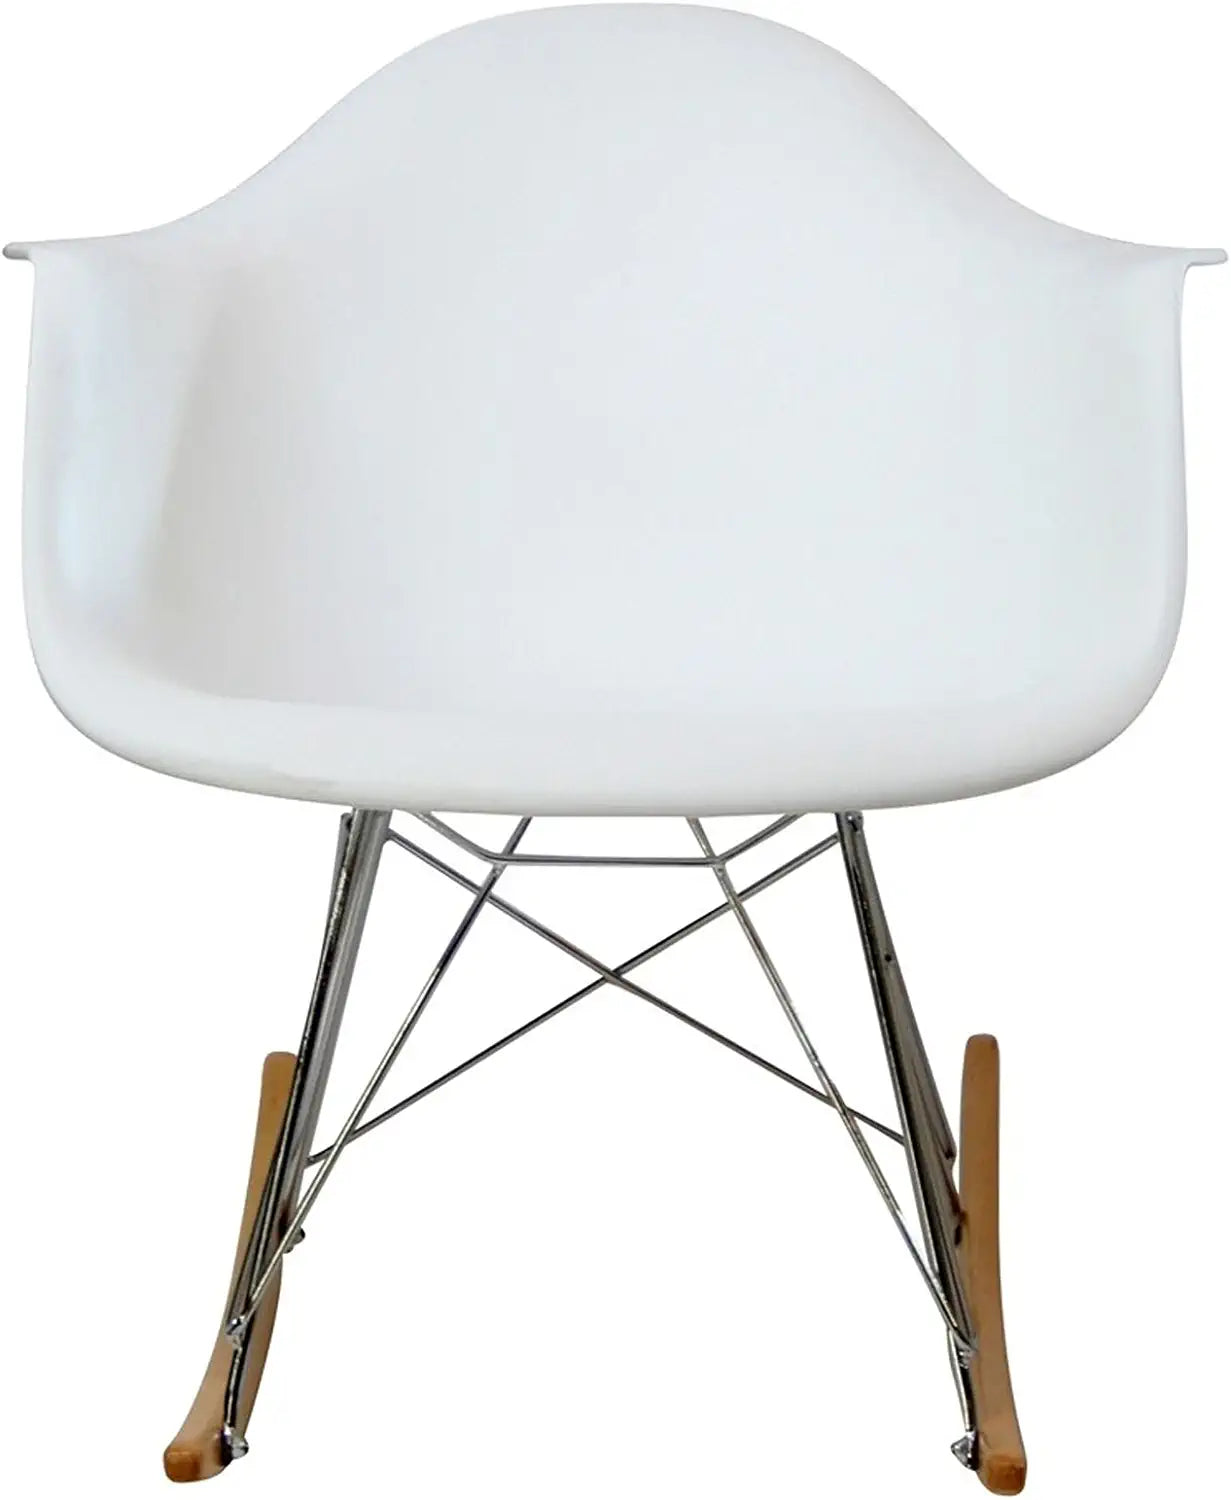 Modway Mid-Century Modern Molded Plastic Kid&#39;s Size Lounge Chair Rocker in White